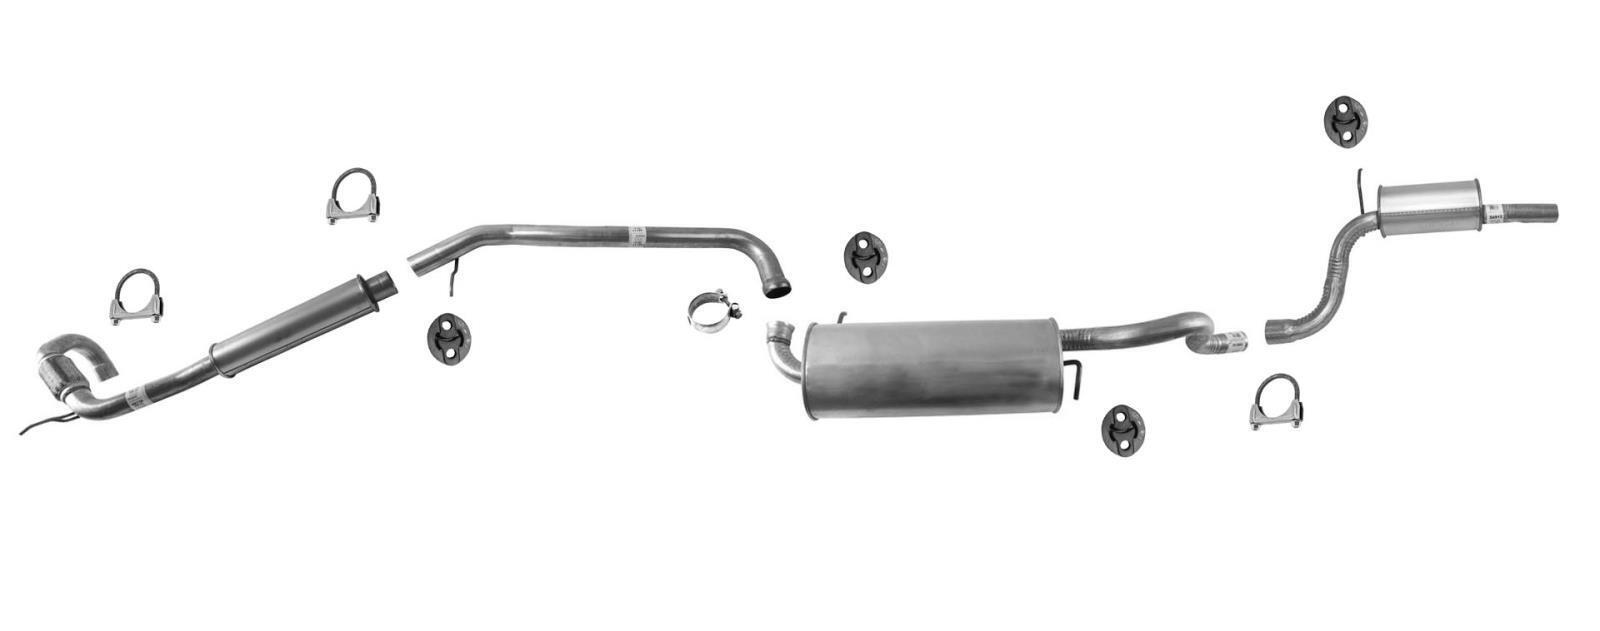 Flex Pipe Muffler Exhaust System 2011-2016 Fits Chrysler Town & Country 3.6L